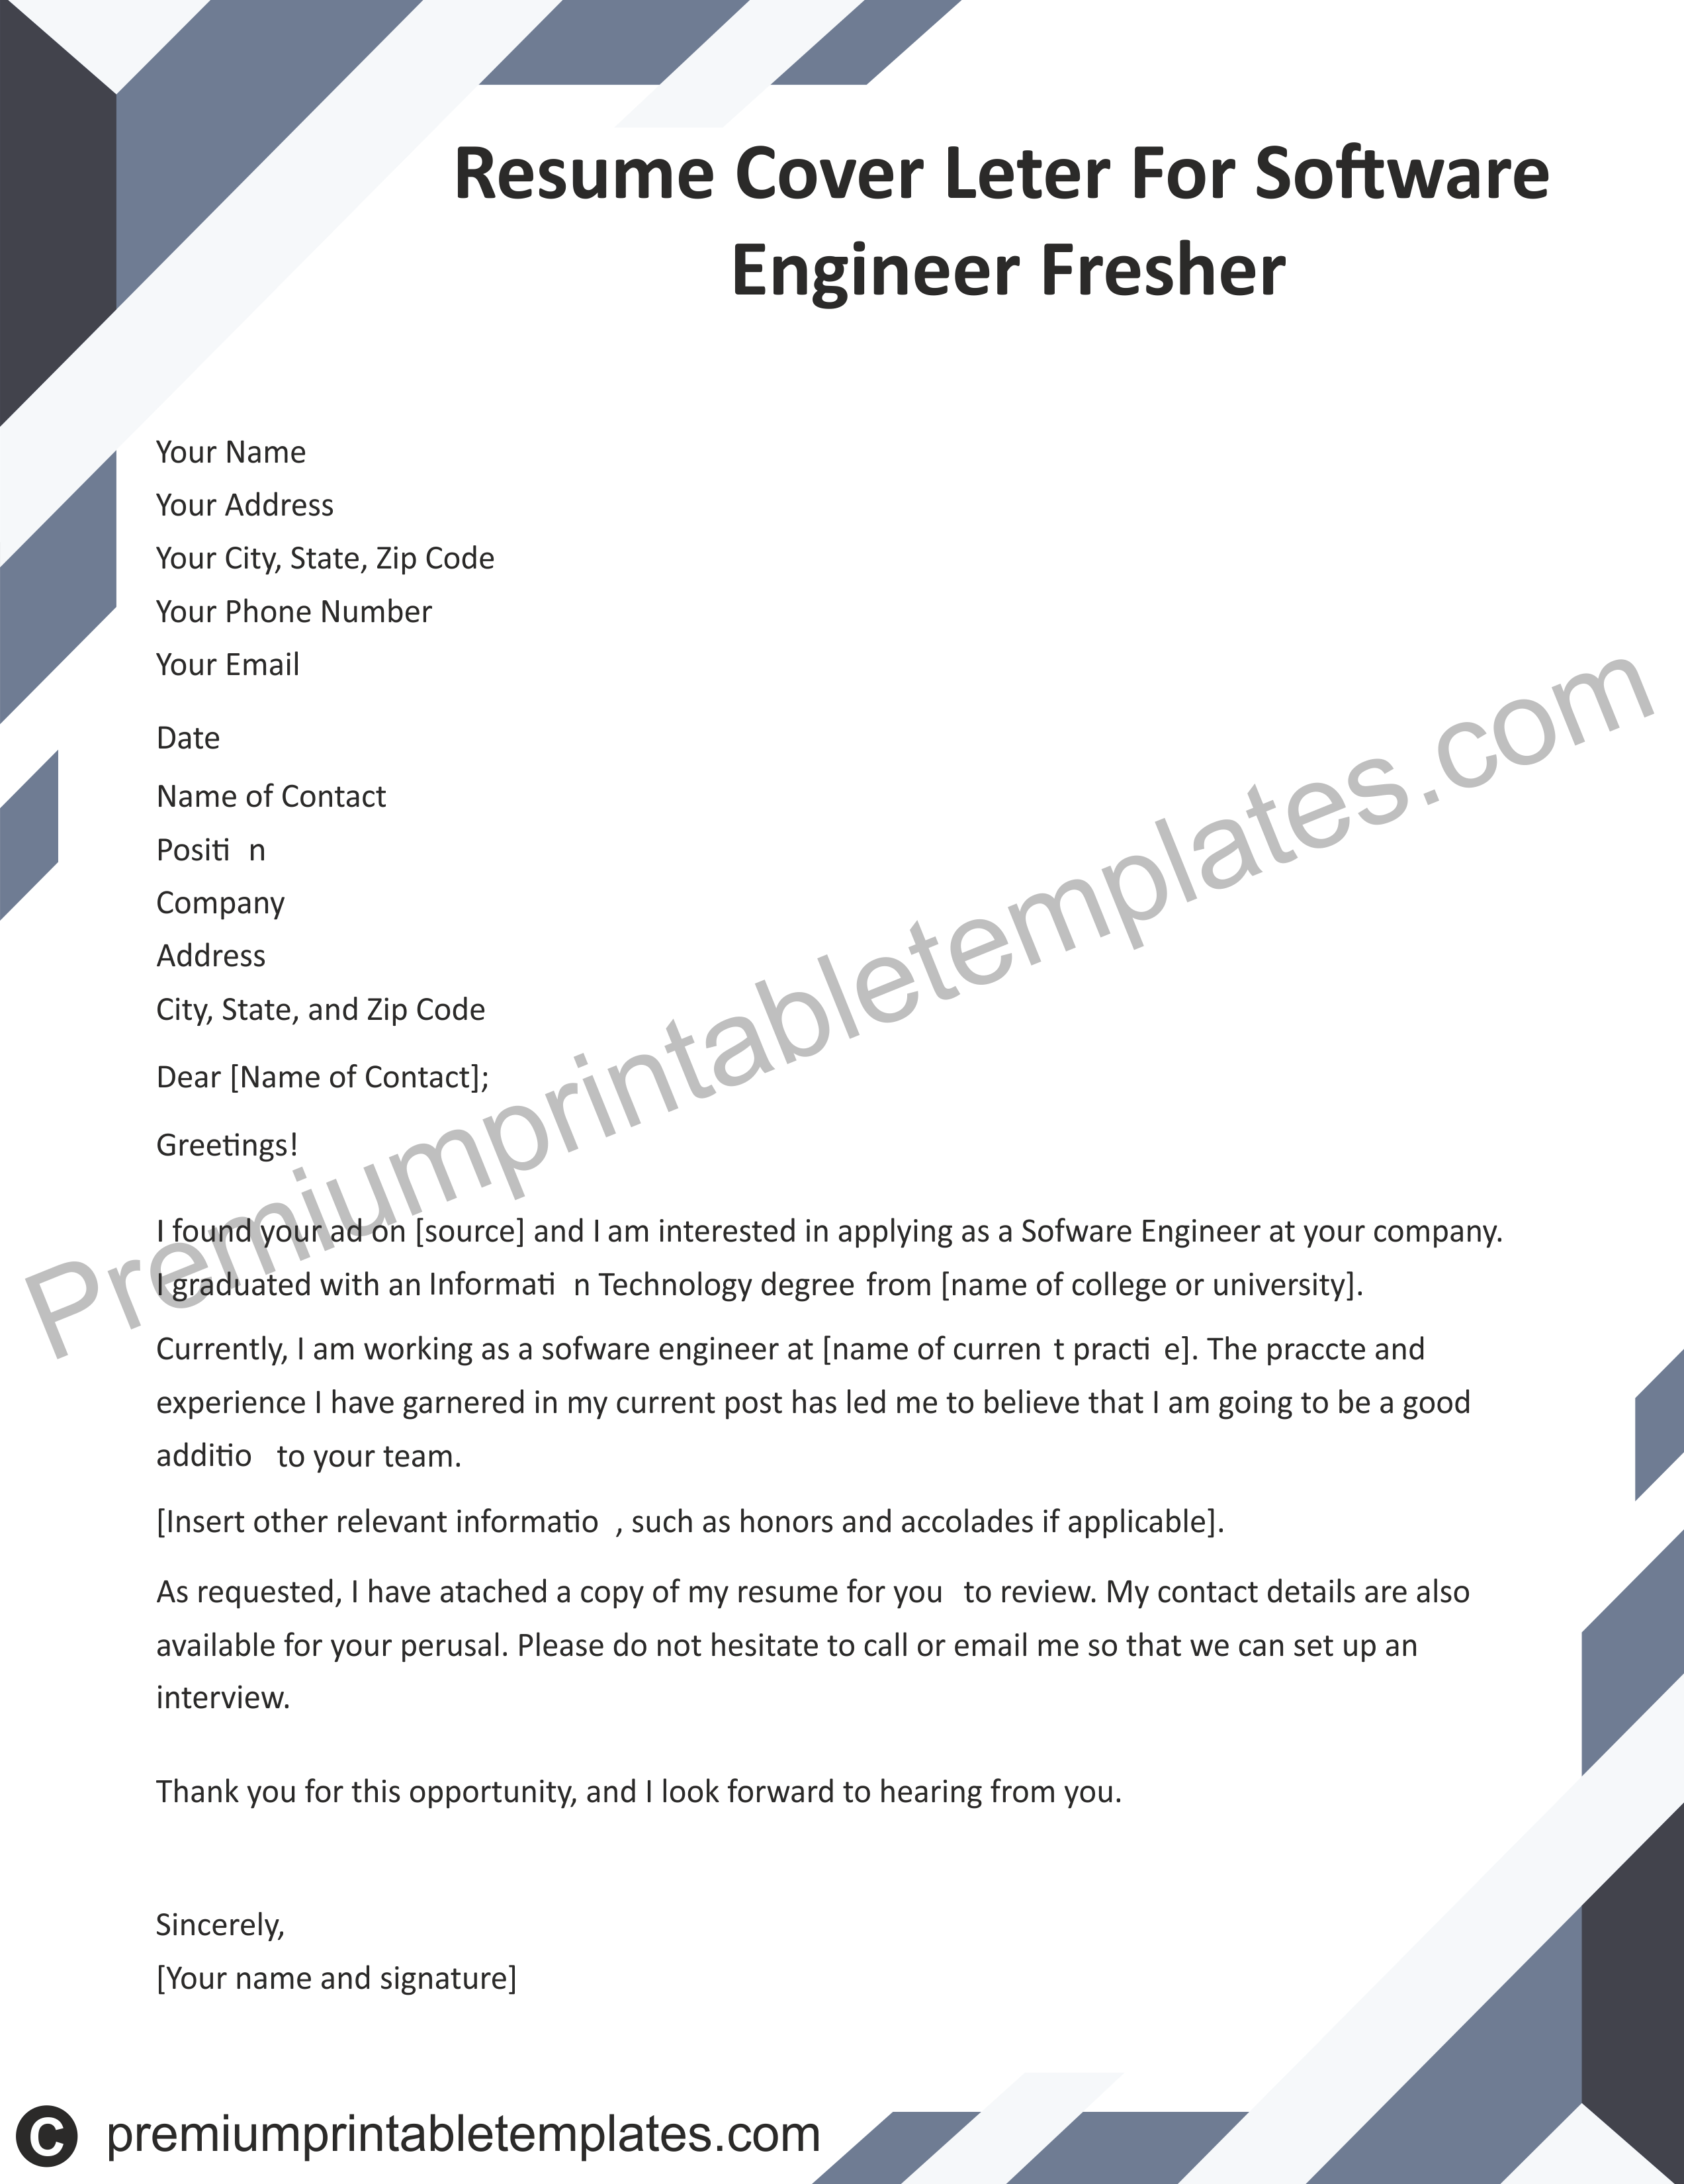 Cover Letter For Software Engineer from premiumprintabletemplates.com